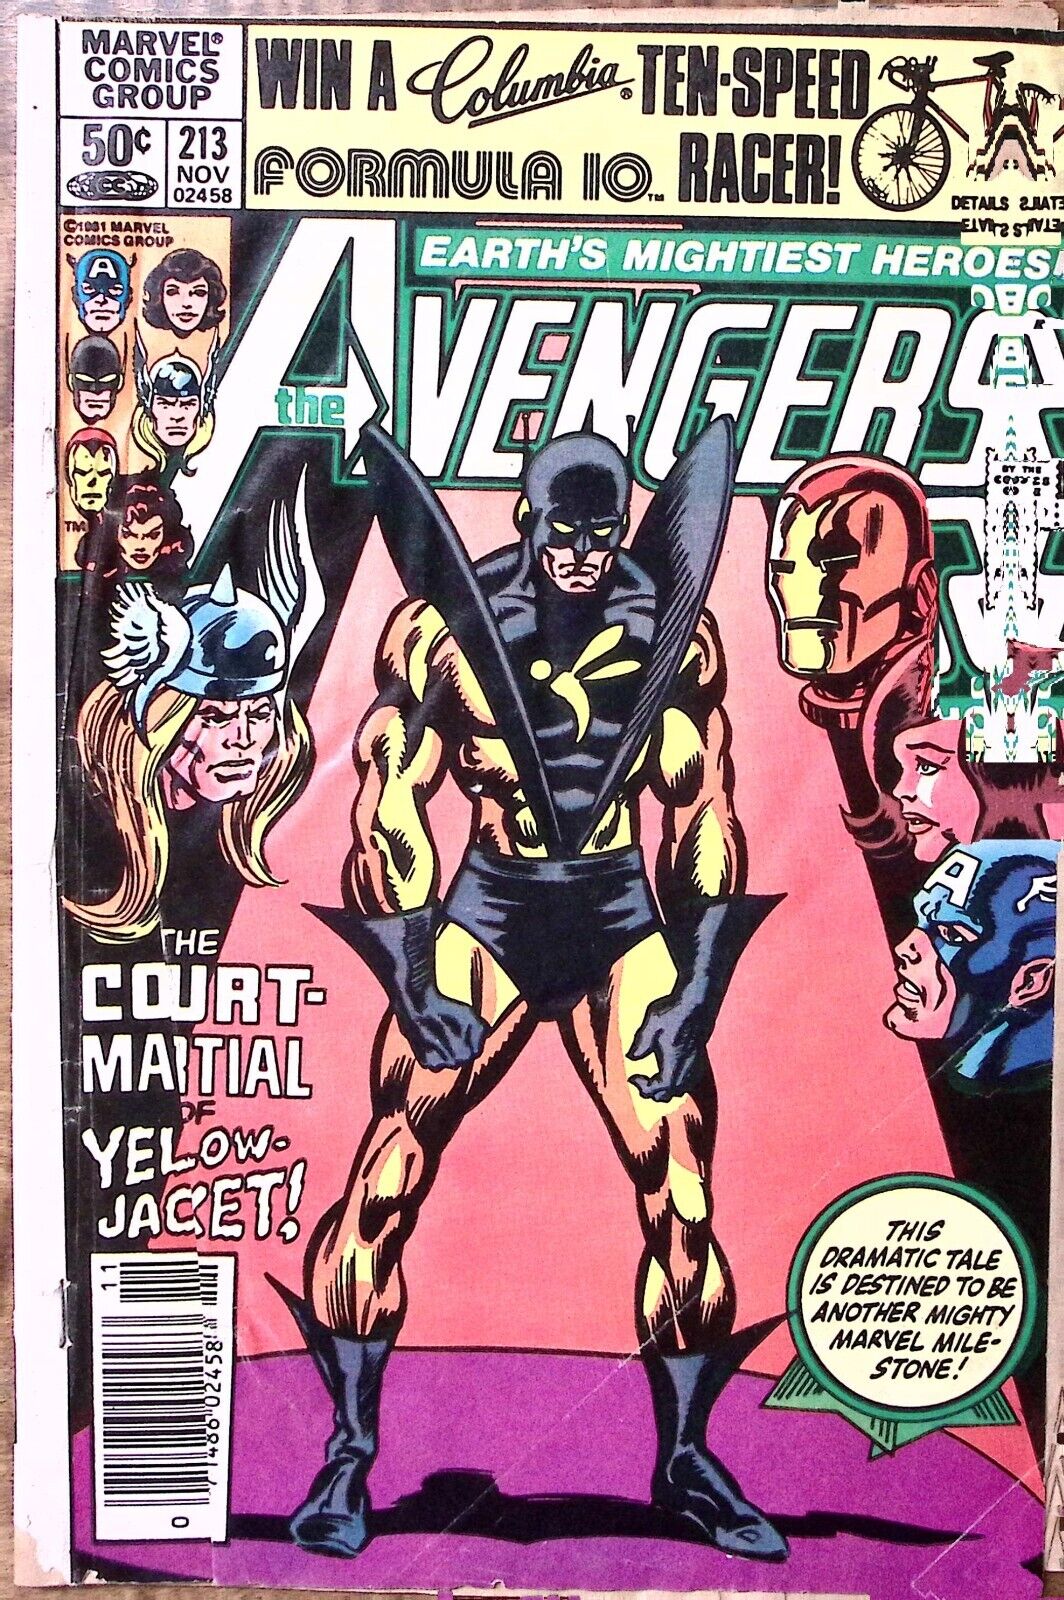 1981 THE AVENGERS #213 NOV THE COURT MARTIAL OF YELLOW JACKET MARVEL Z3849